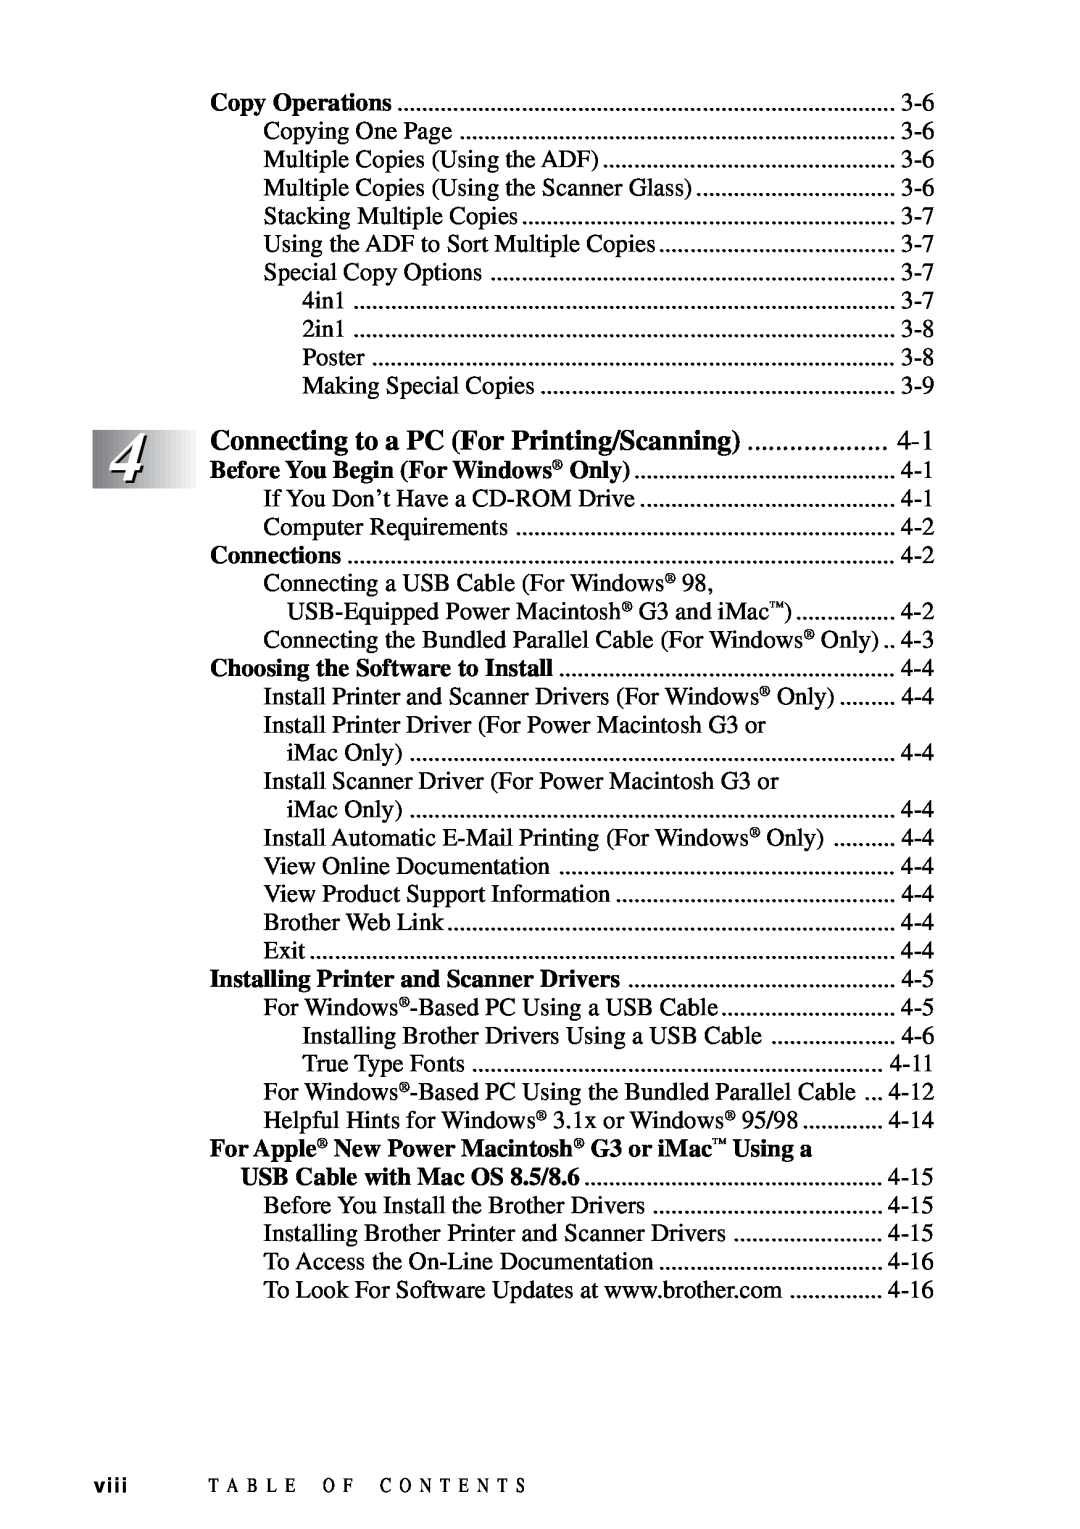 Brother DCP1200 manual Connecting to a PC For Printing/Scanning, For Apple New Power Macintosh G3 or iMac Using a 